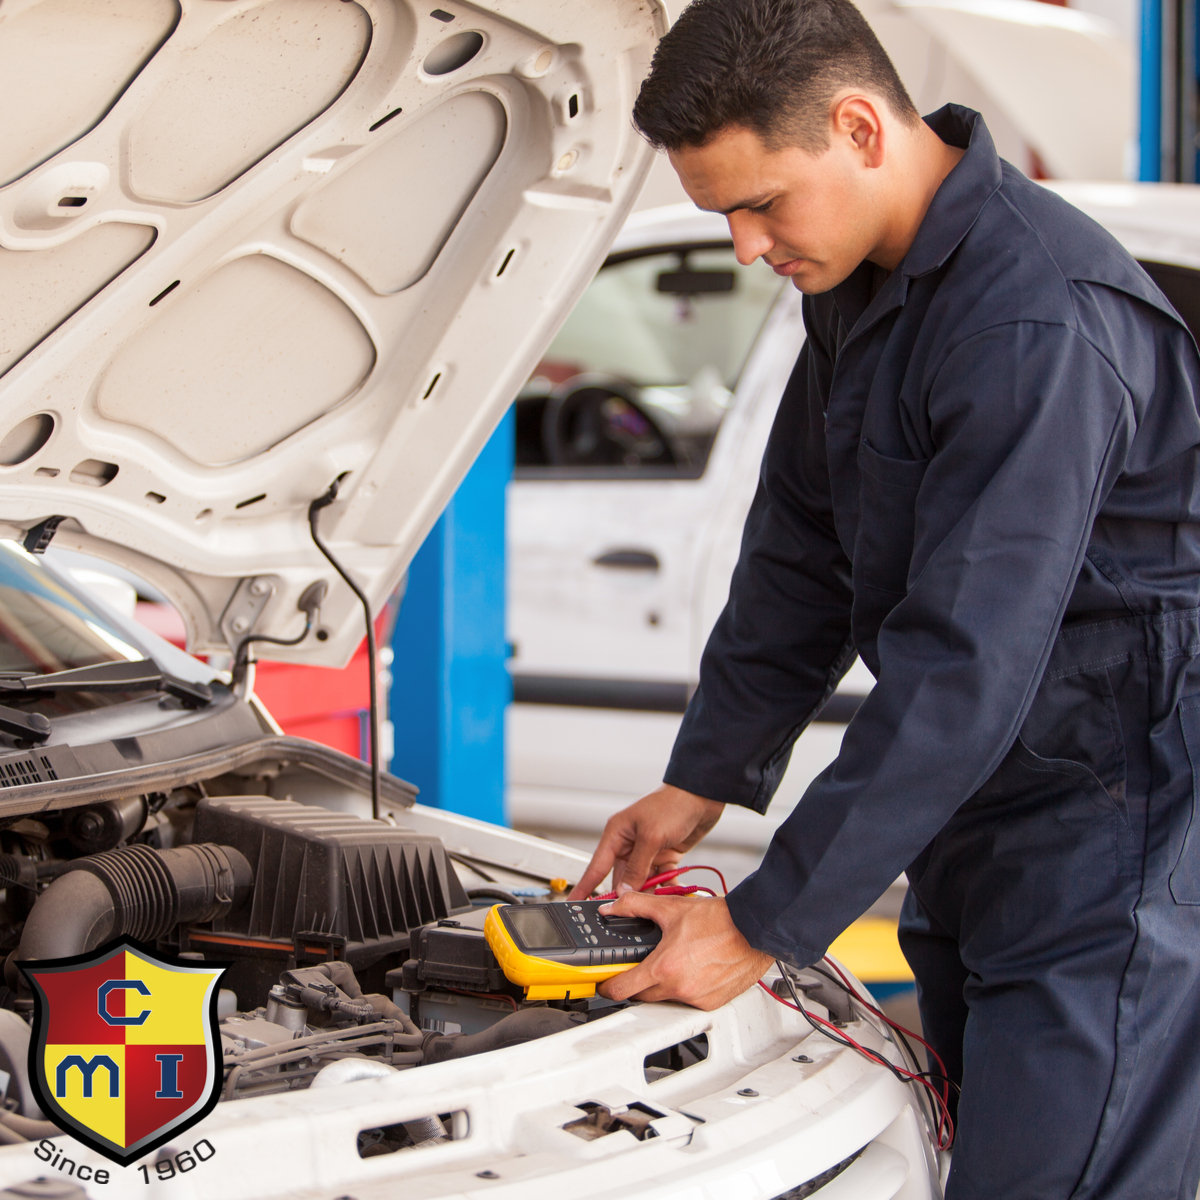 Electrical Problems with Your Car? Get Diagnosis and Repair from Conaway Motors!